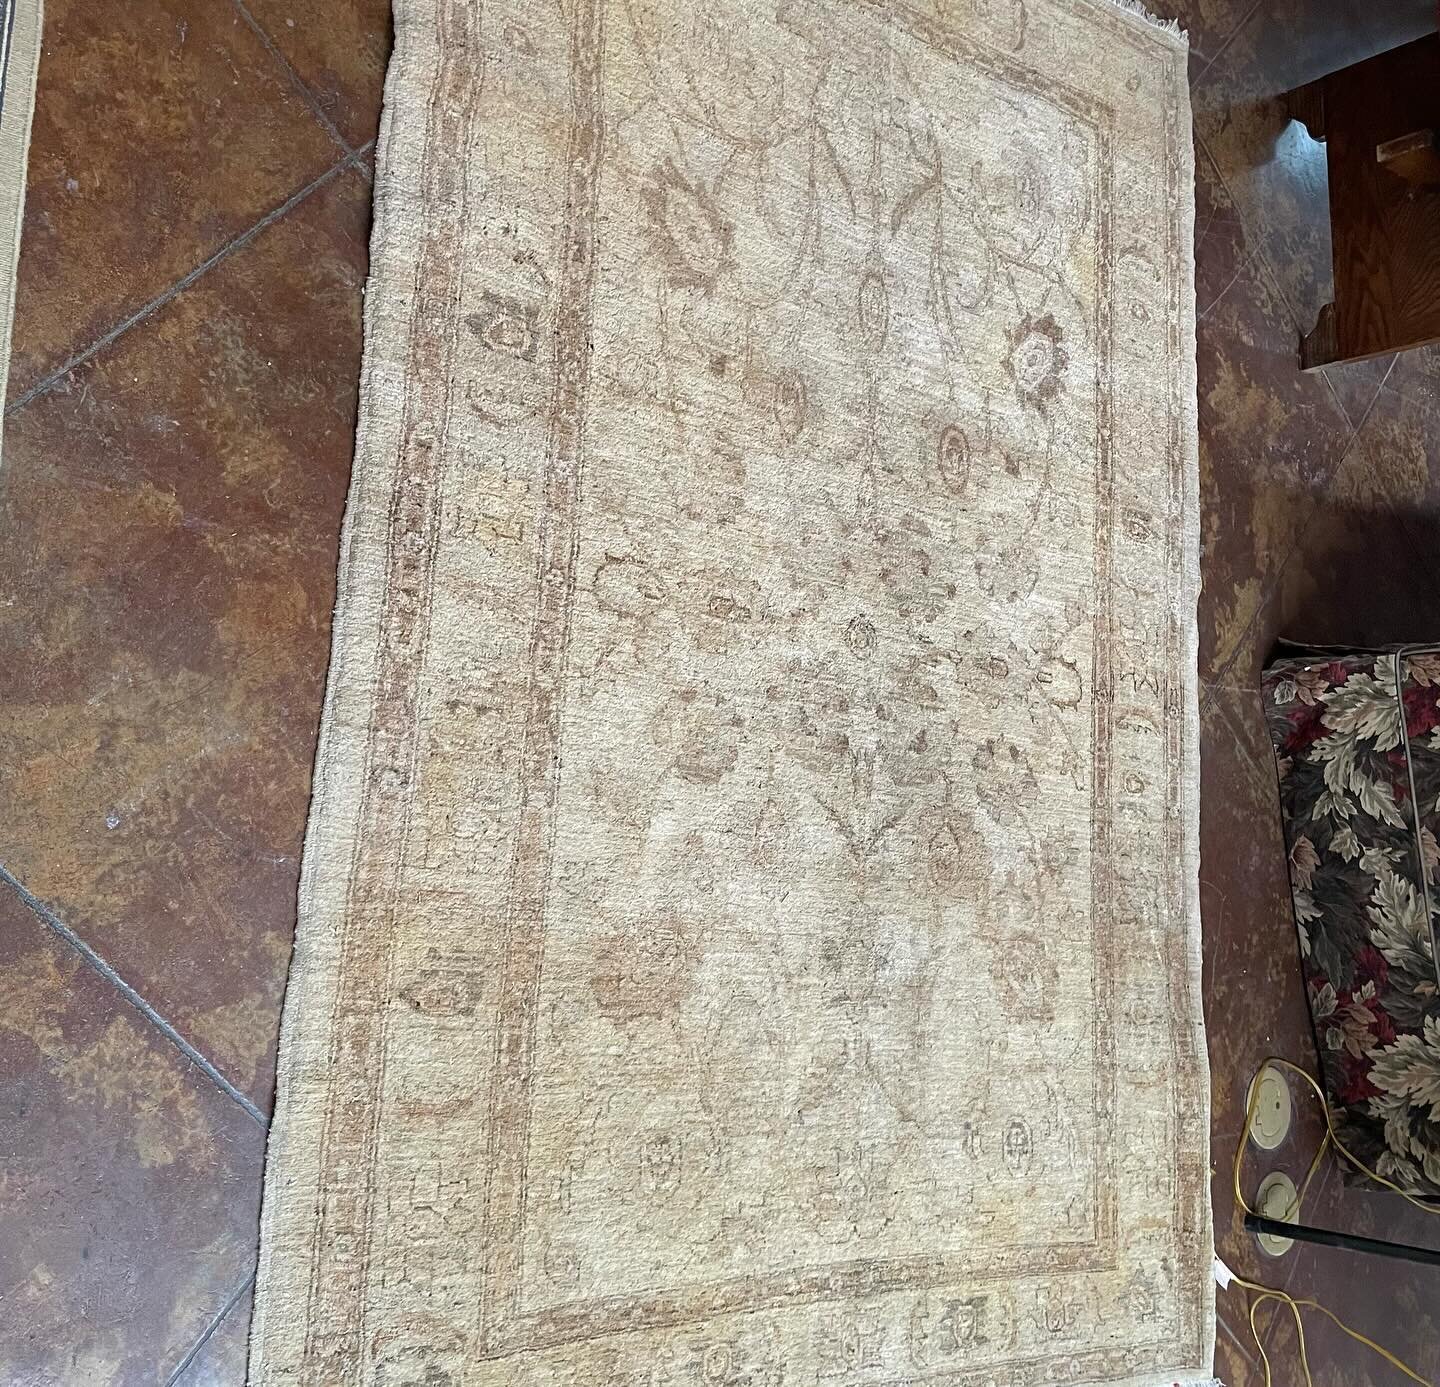 At the #estatesale here in #taos I have these #persianrug or #persiancarpet items available, each are @$200. There are two #runners and two matching red rugs (7 total). It is by appointment only for the next two weeks, March 2 &amp; 3 I&rsquo;ll be o